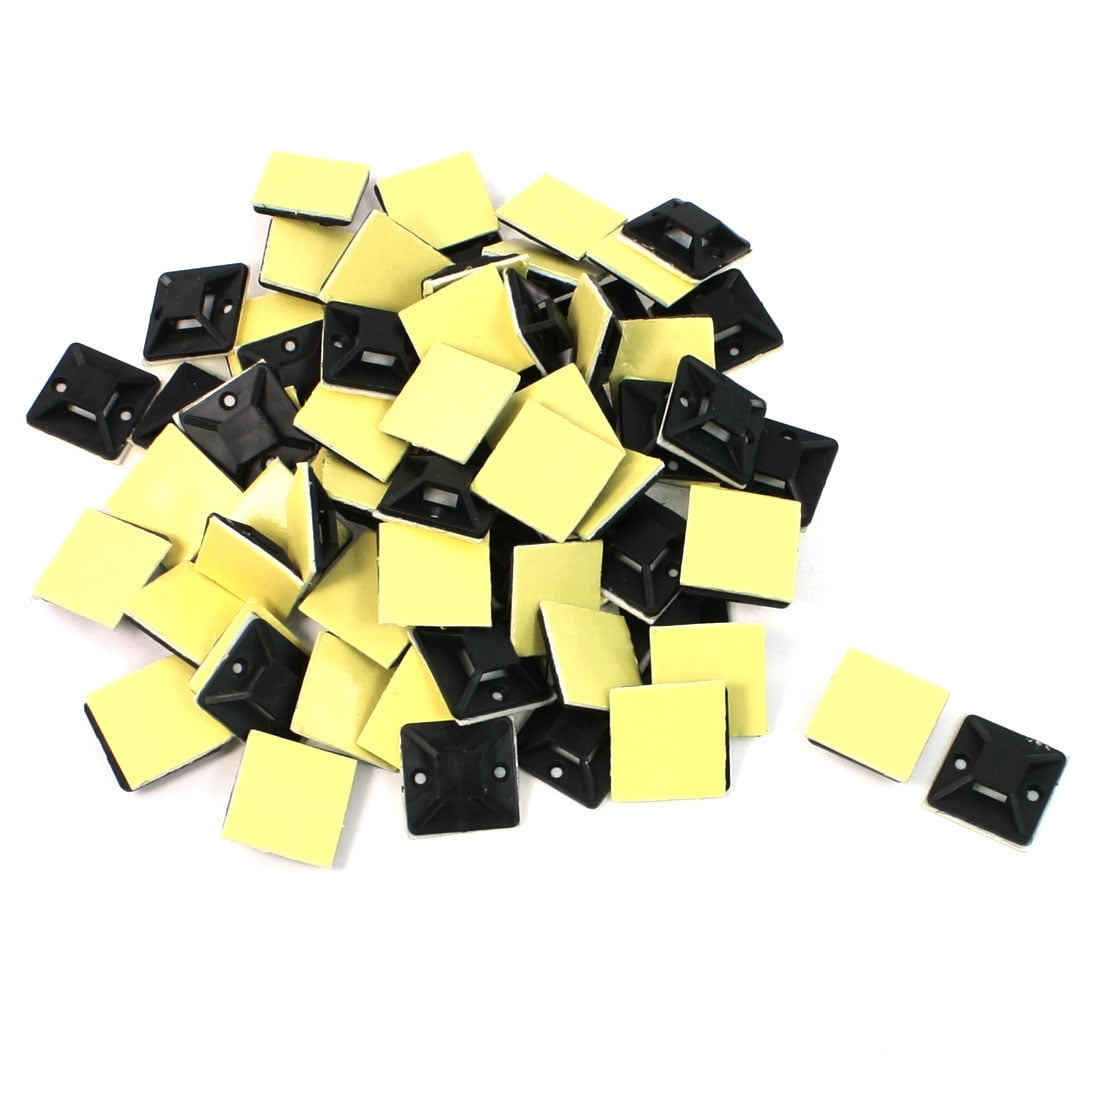 100 Pcs Self Adhesive Cable Tie Mount Base Holder 20 x 20 x 6ms4 